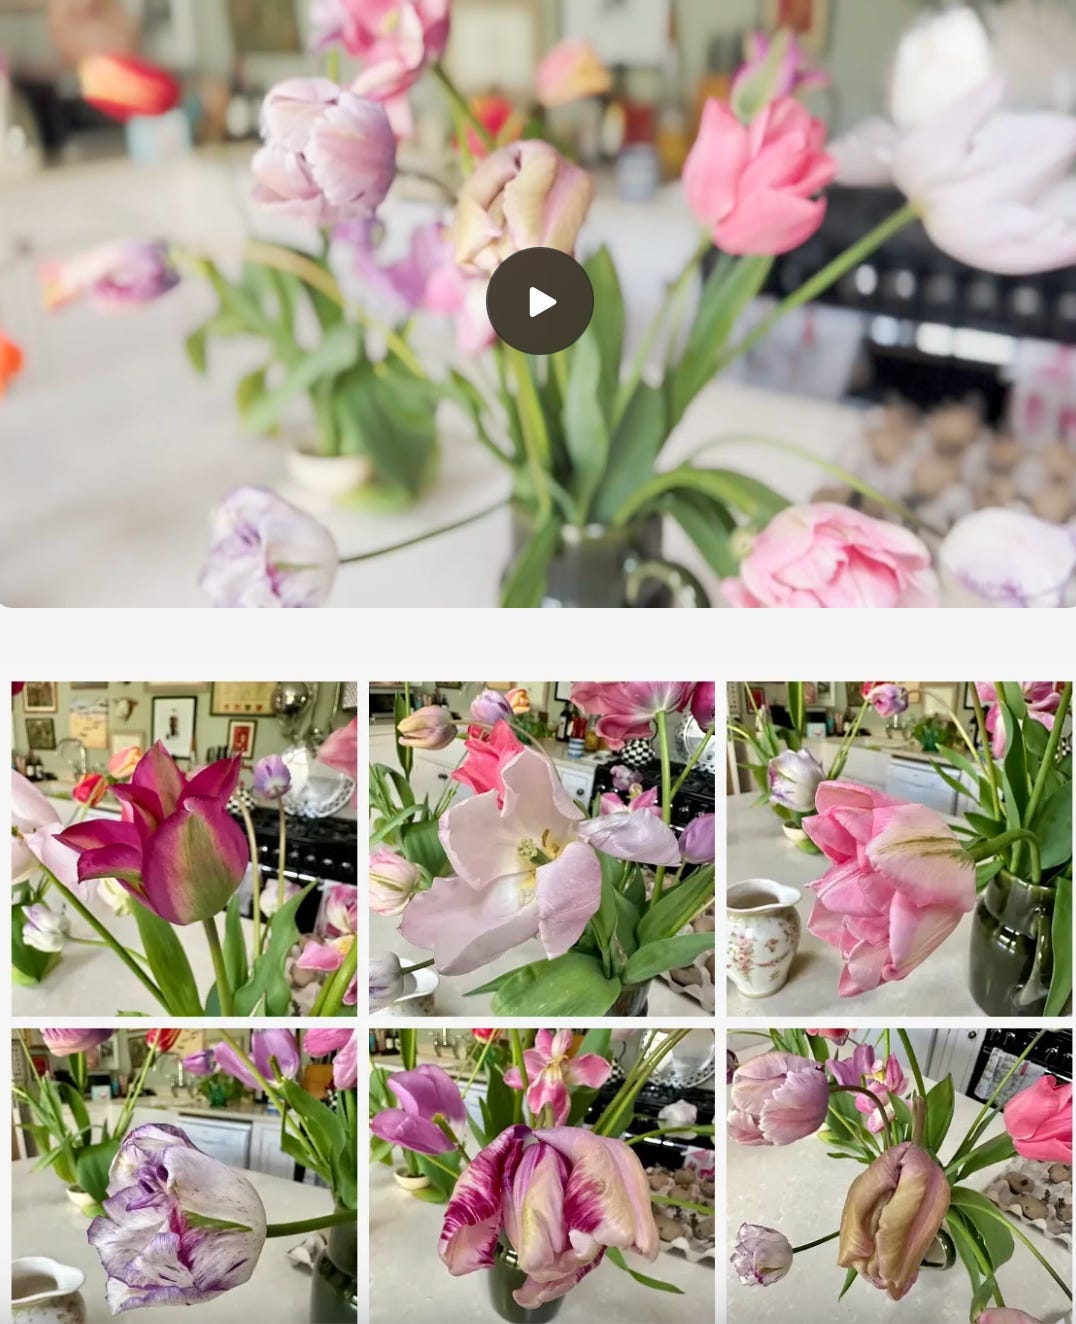 Beautiful tulips in pink and white